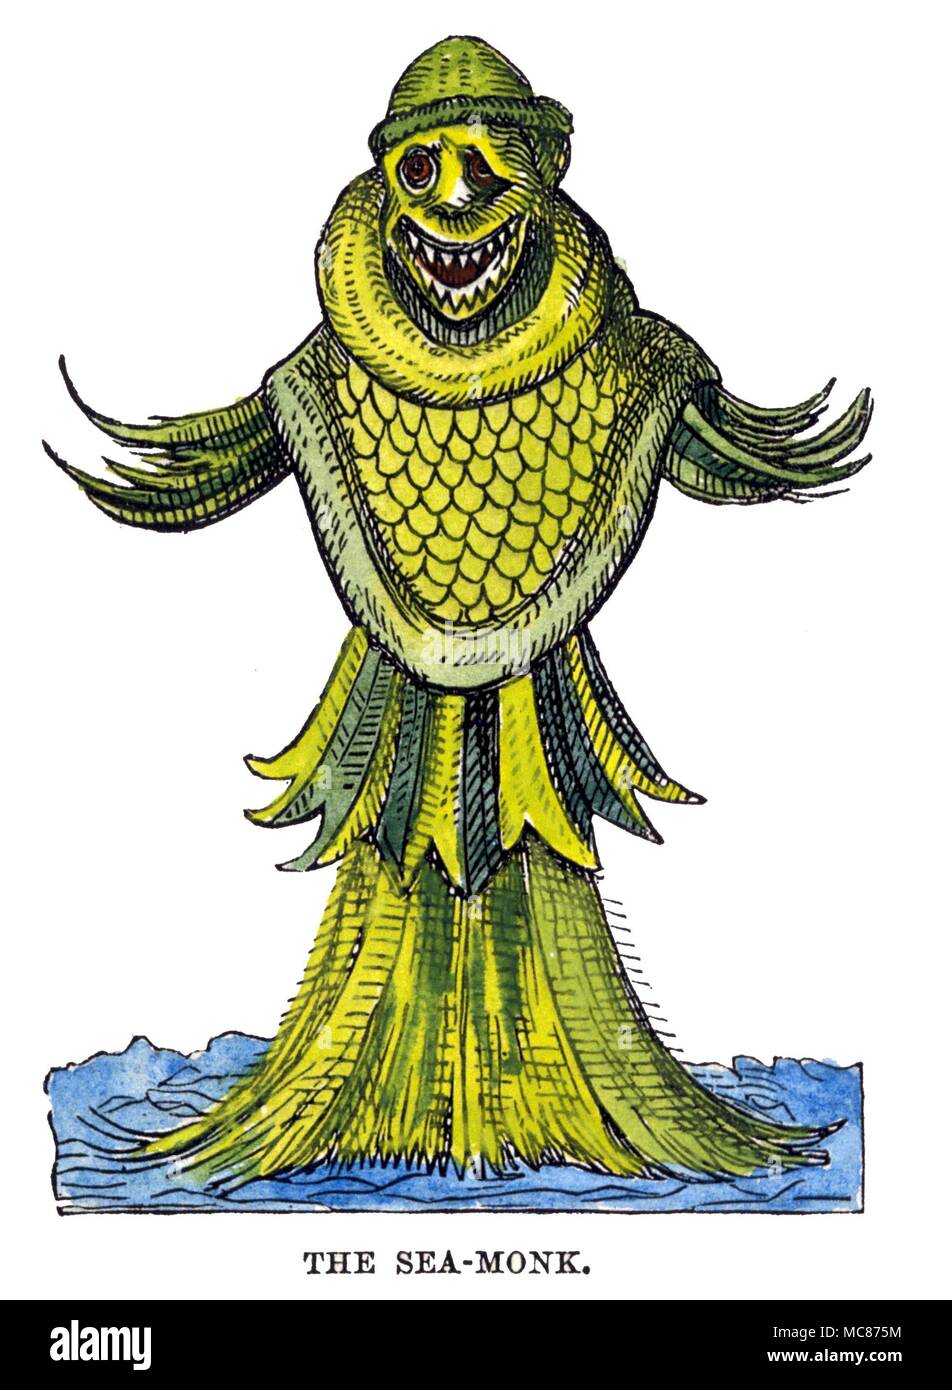 MONSTERS Sea-Monk - a marine monster from travellers' tales, from a time when it was believed that the sea had the equivalent of every creature found on land. From the 1864 edition of 'The Book of Days' Stock Photo